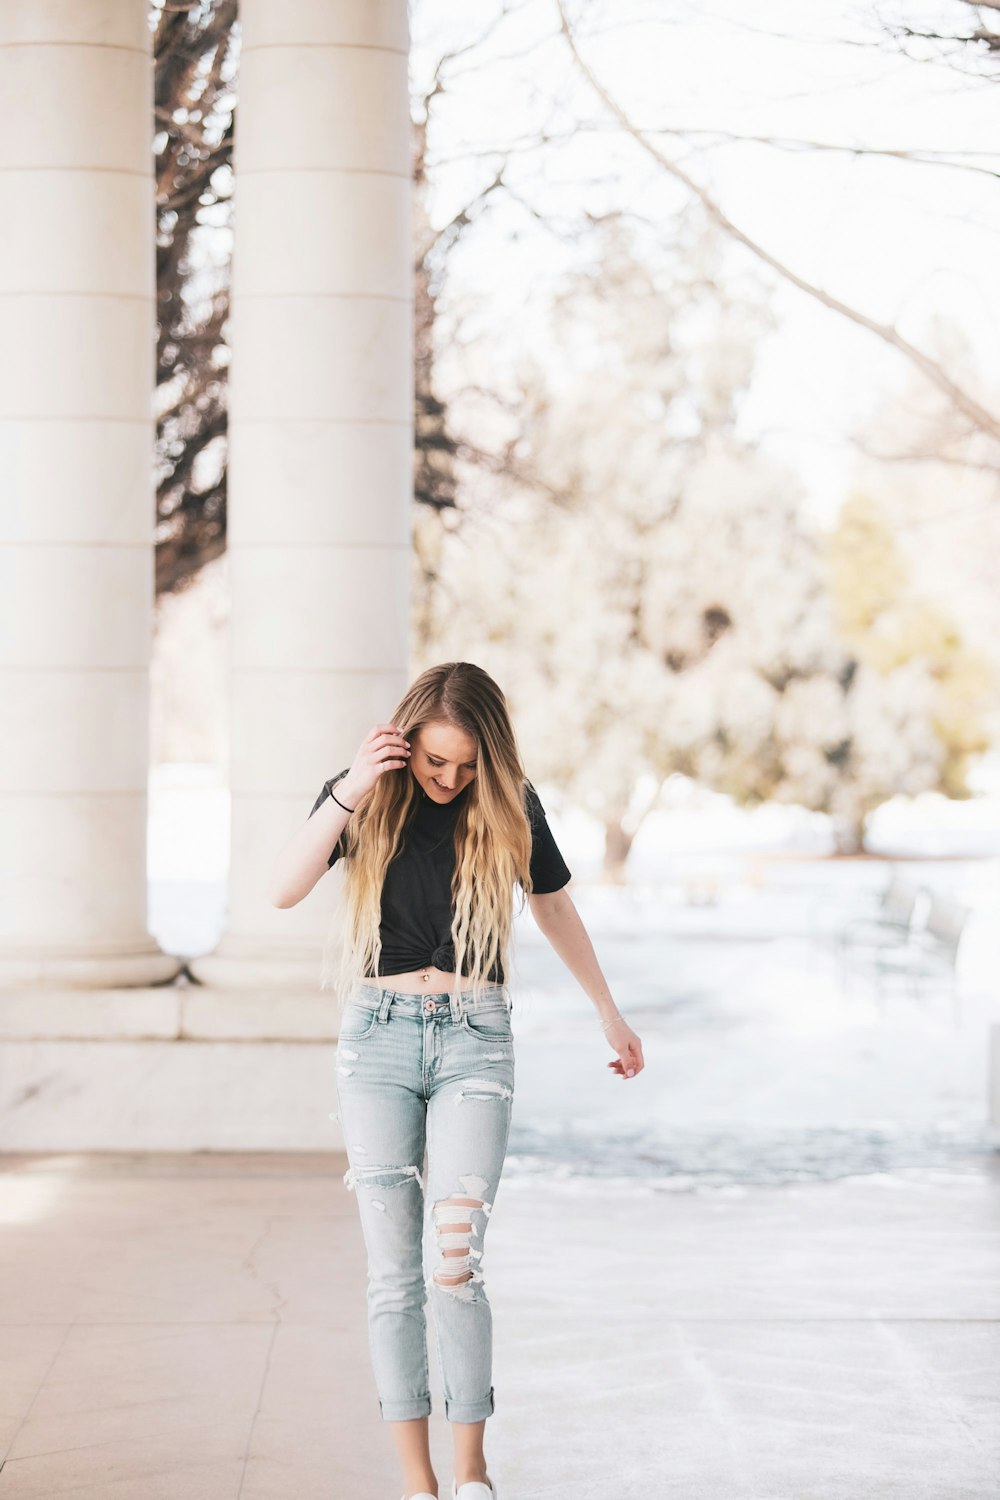 Woman in black long sleeve shirt and blue denim jeans standing near white  concrete building during photo – Free Clothing Image on Unsplash